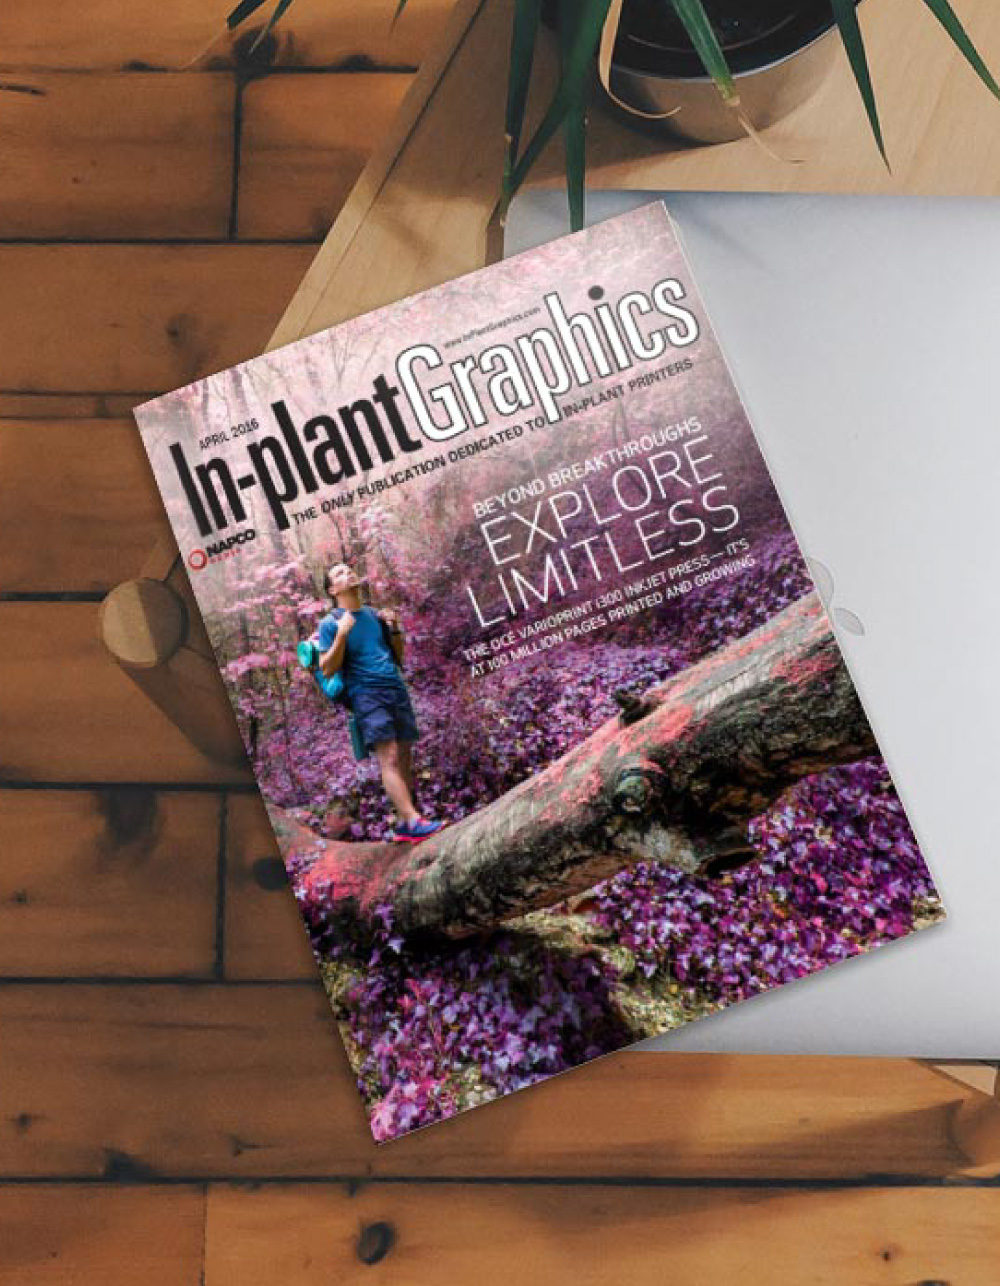 magazine on top of laptop on coffee table, cove shows man exploring in purple forest